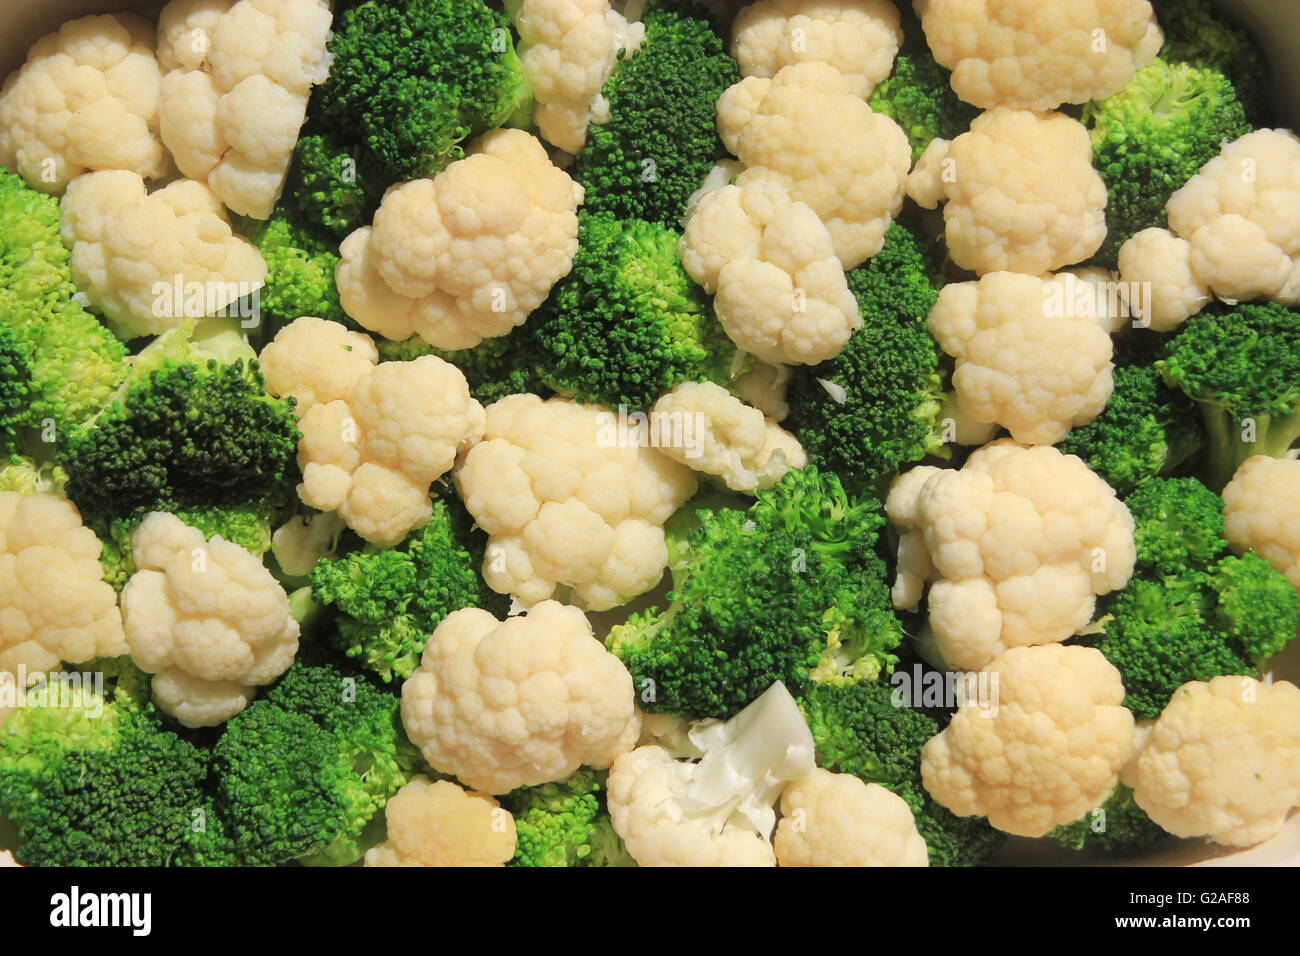 Close up of broccoli and cauliflower florets symbolizing healthy eating and background vegetables Stock Photo